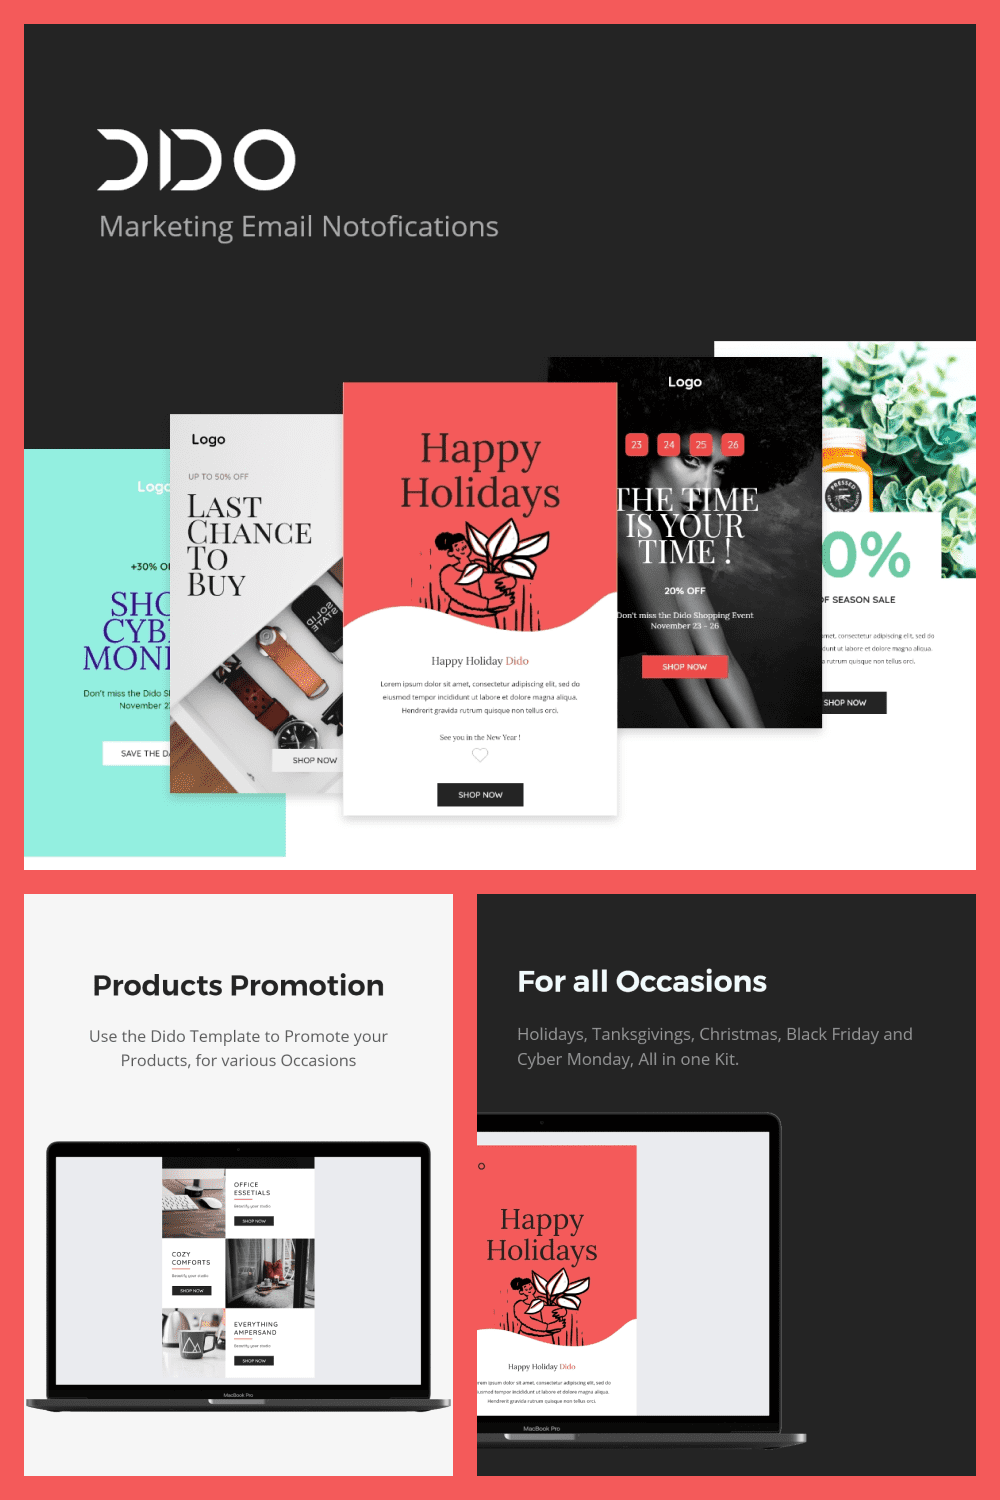 Responsive Email Notifications Templates for Different Tastes.